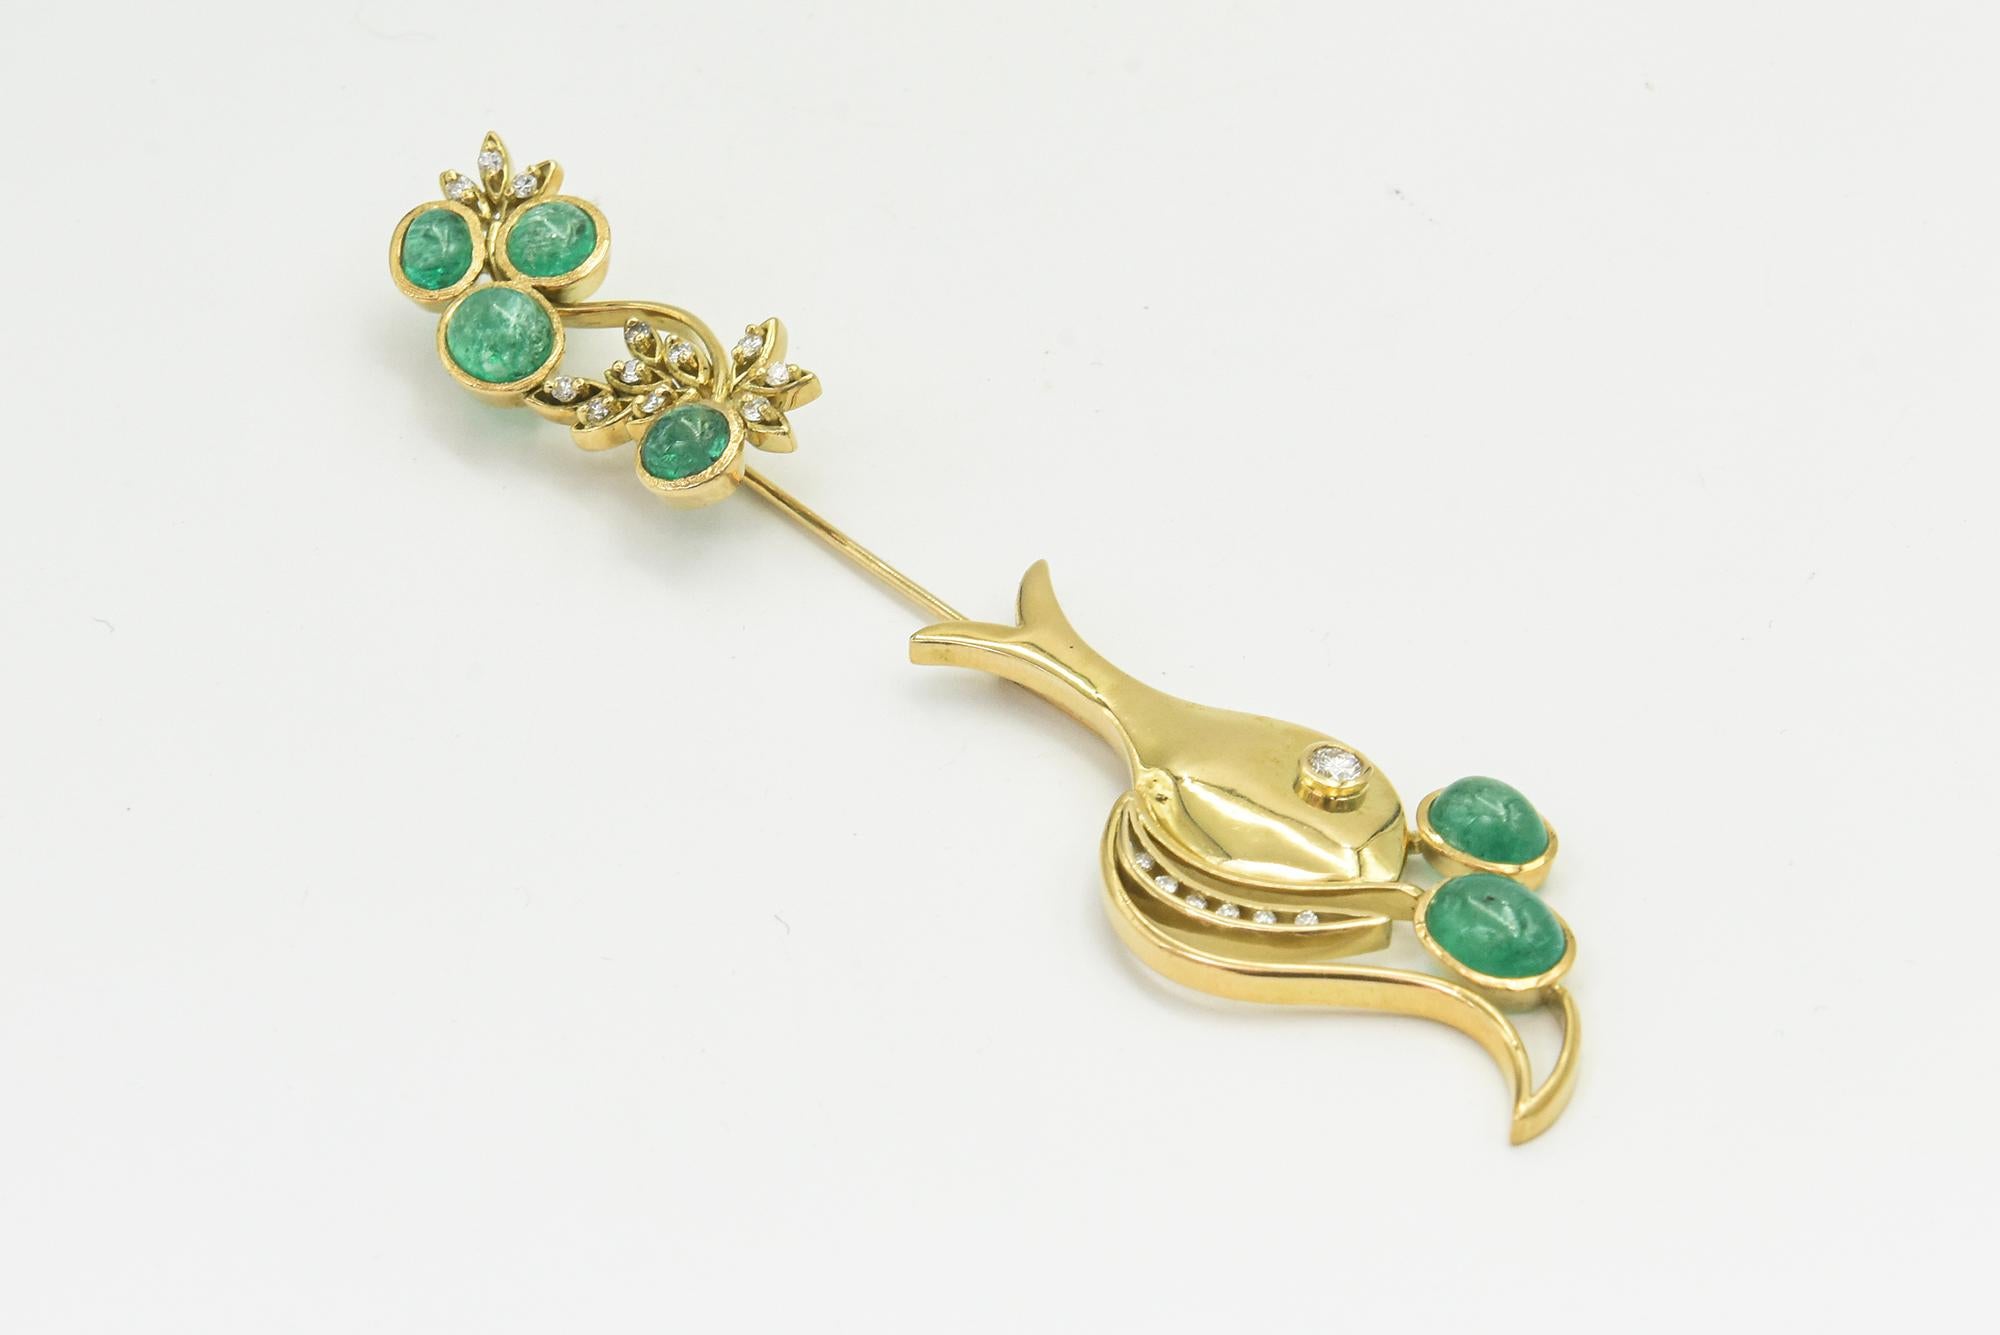 This jabot pin was a custom made in the 1970s,  it uses the jabot style to illustrate a fish swimming through the sea.  The 18k yellow gold fish brooch is accented with diamonds and emeralds.  To open you just pull at either end.

According to